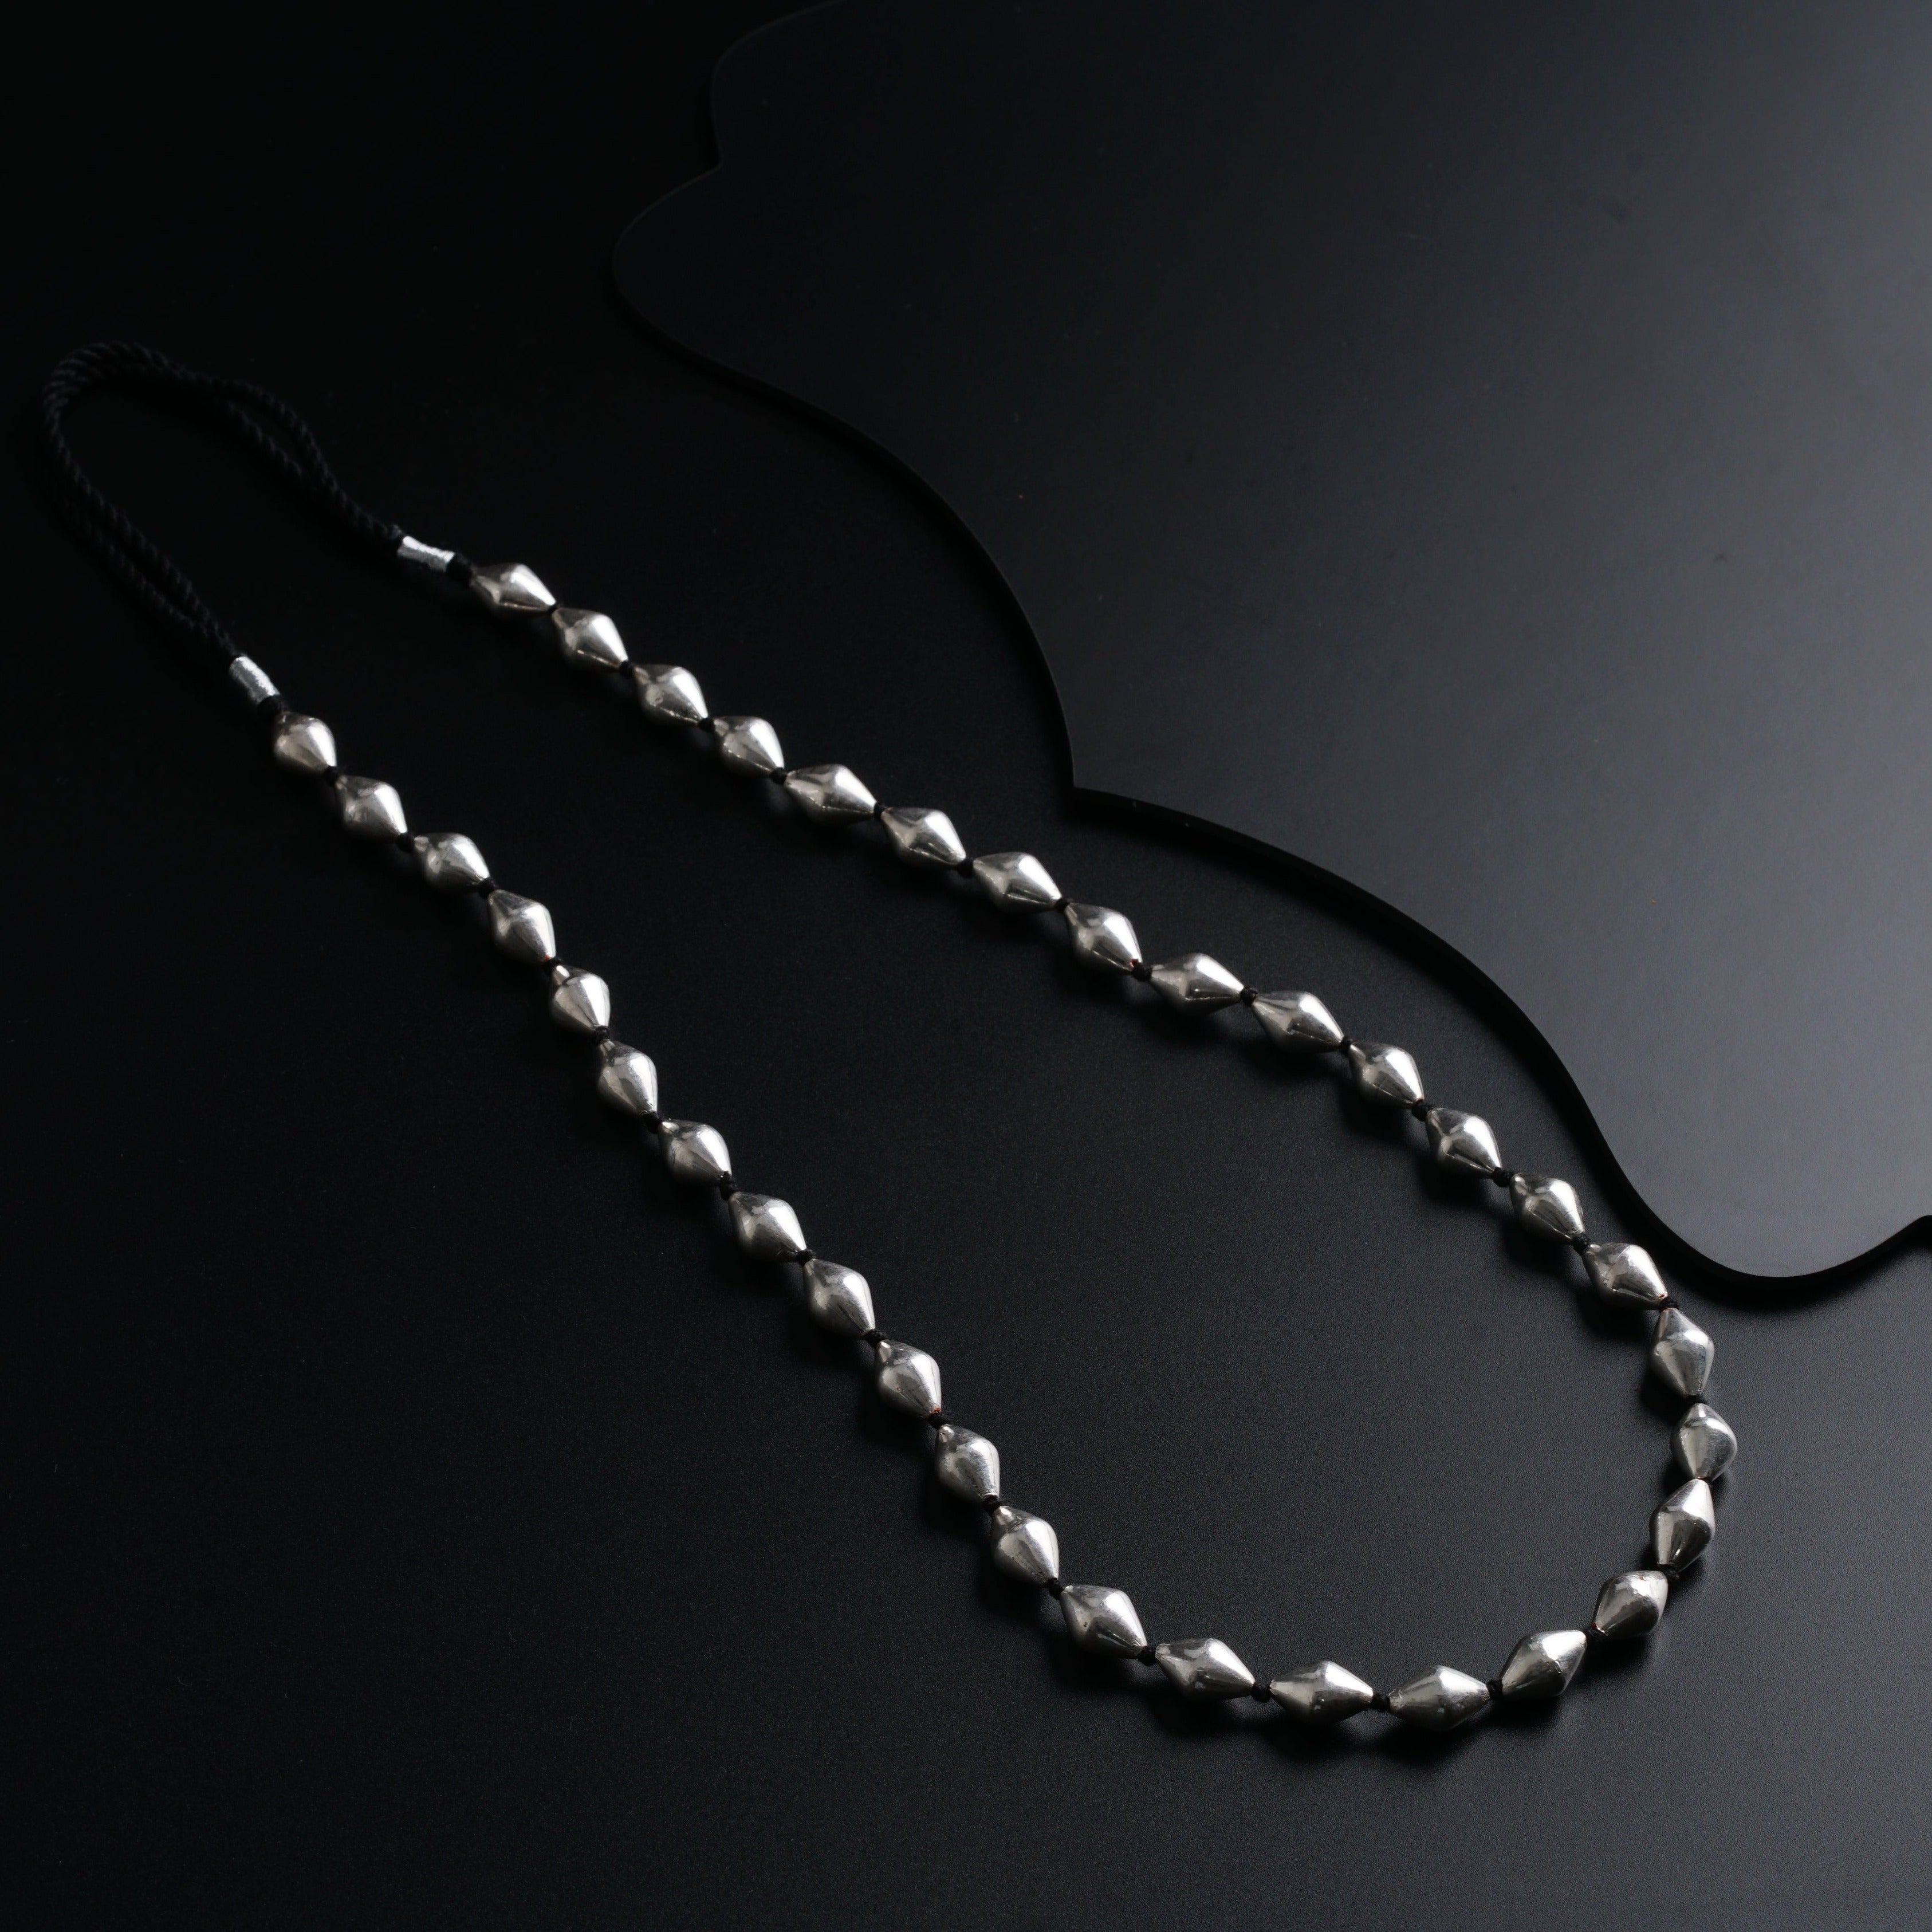 a long silver beaded necklace on a black surface